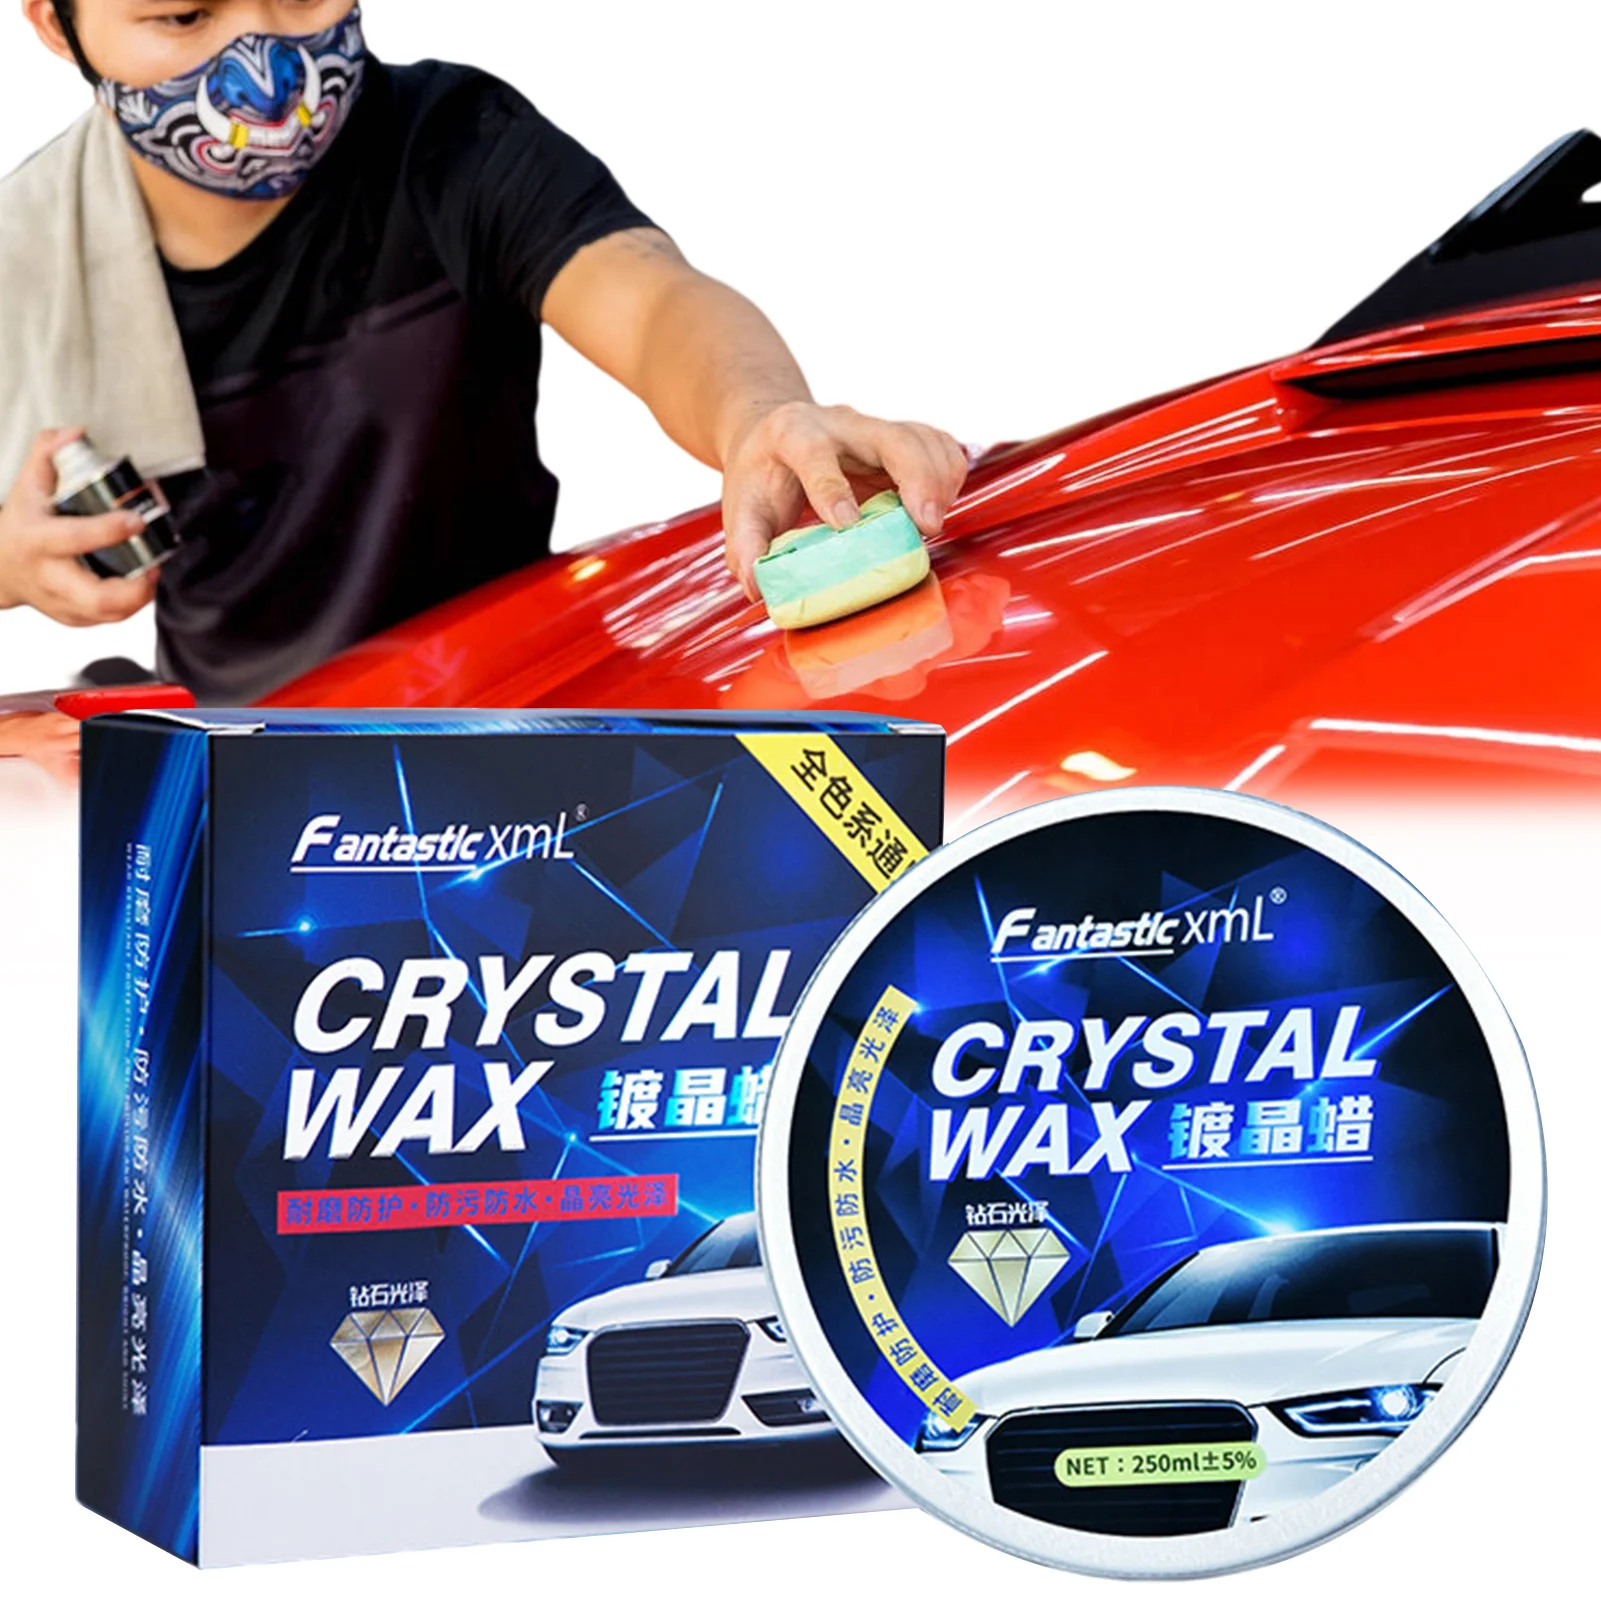 

200ml Car Wax Crystal Plating Set Hard Glossy Carnauba Wax Coating Care Car Scratches Fast Repair with Waxing Sponge and Towel